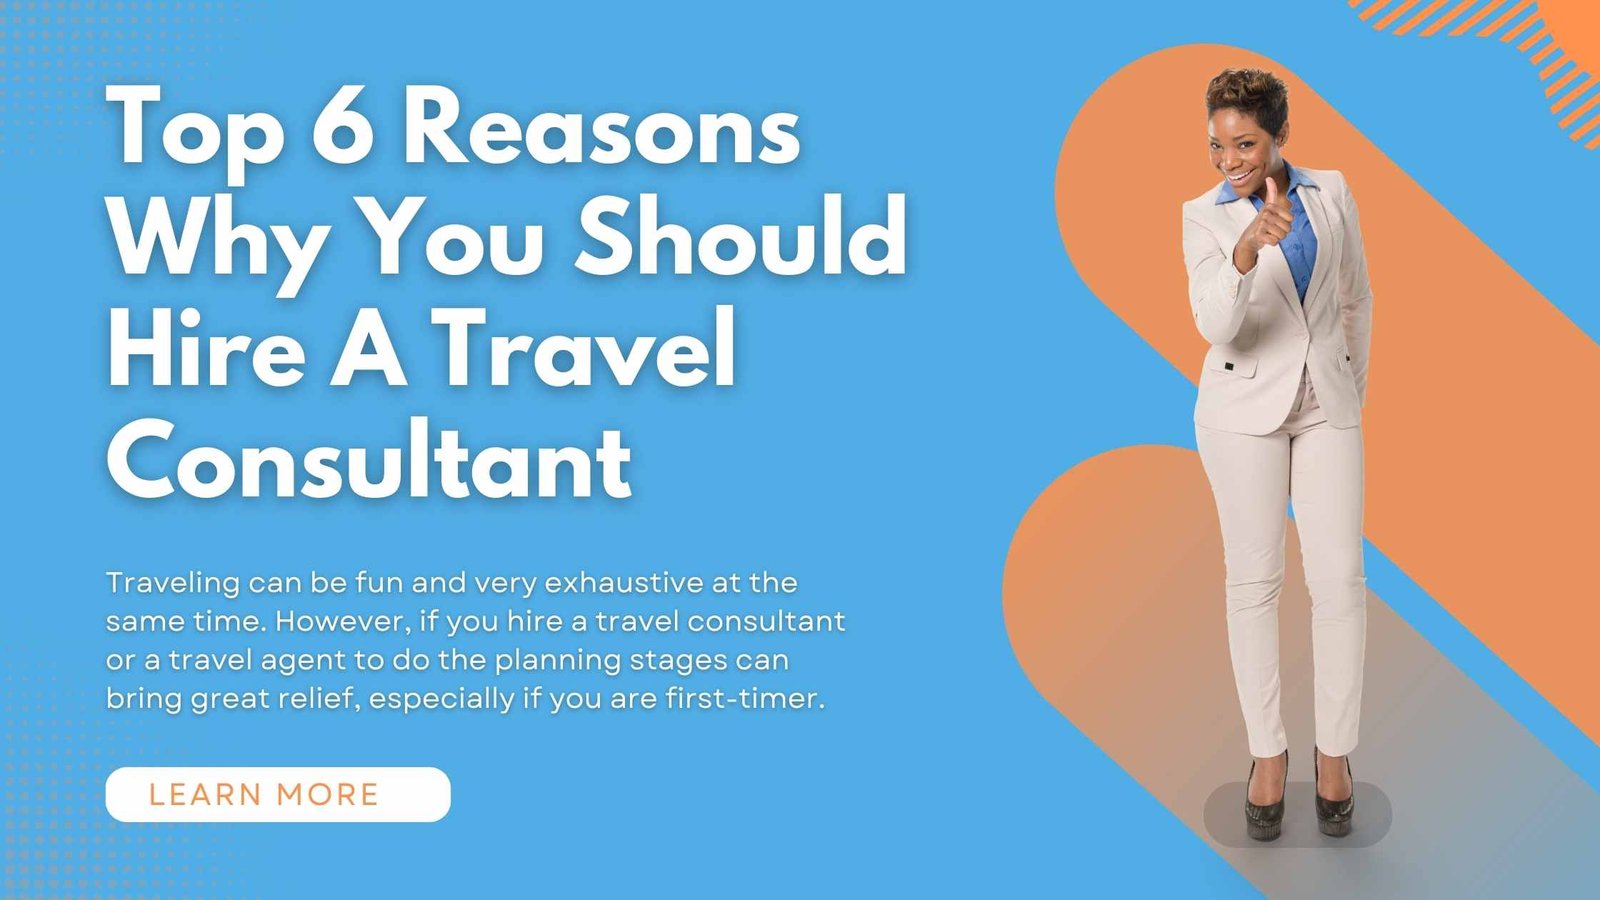 Top 6 Reasons Why you should hire a travel consultant